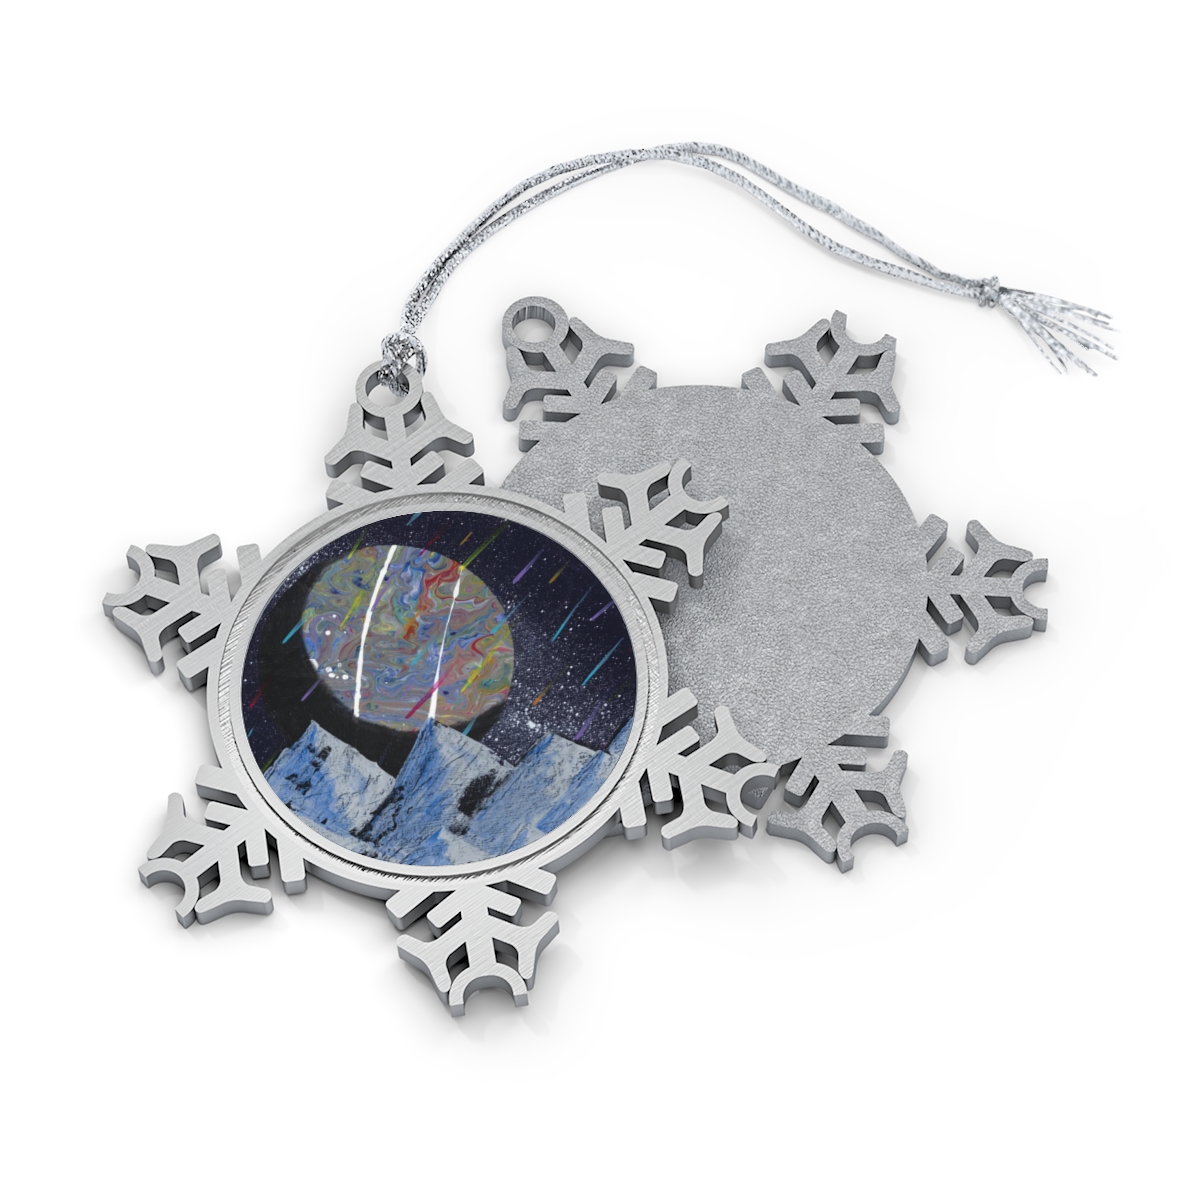 Pewter Snowflake Ornament - Through the Comet's Tail